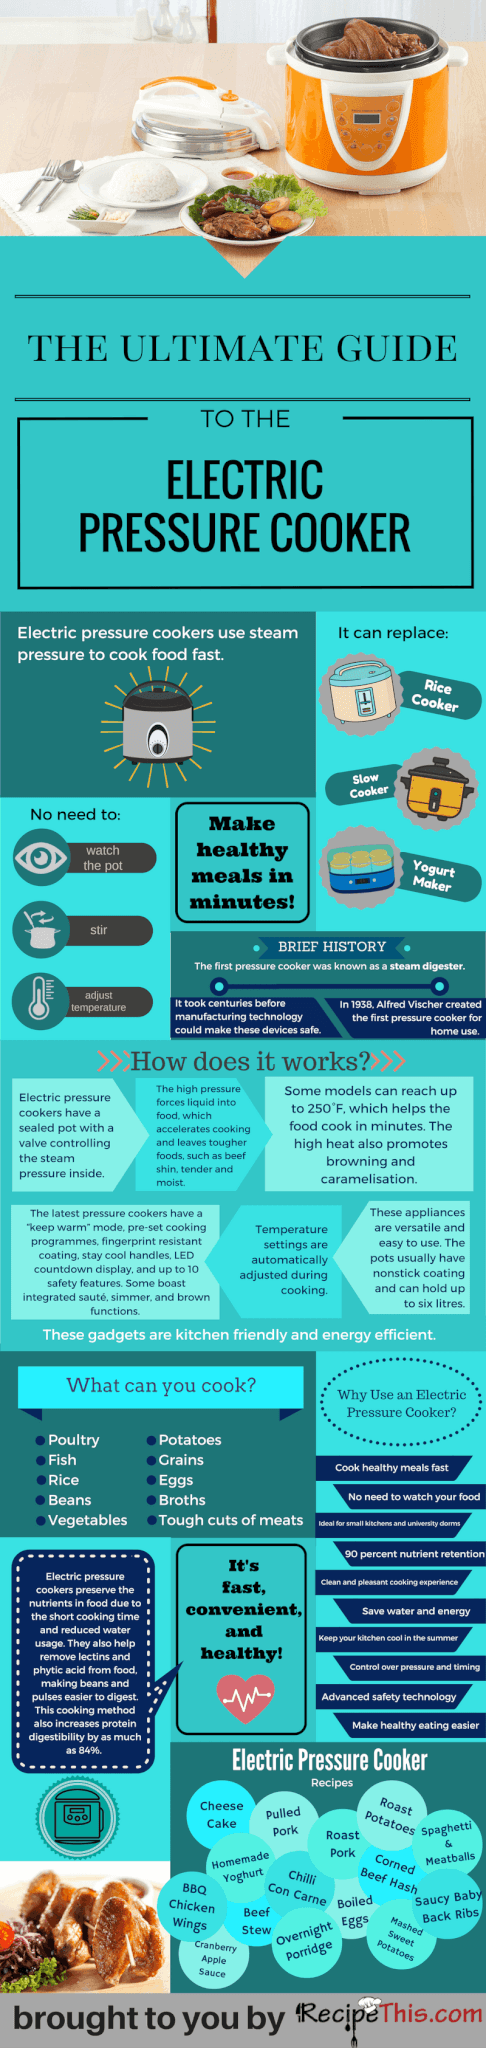 Instant Pot | The Ultimate Guide To The Electric Pressure Cooker Infographic from RecipeThis.com